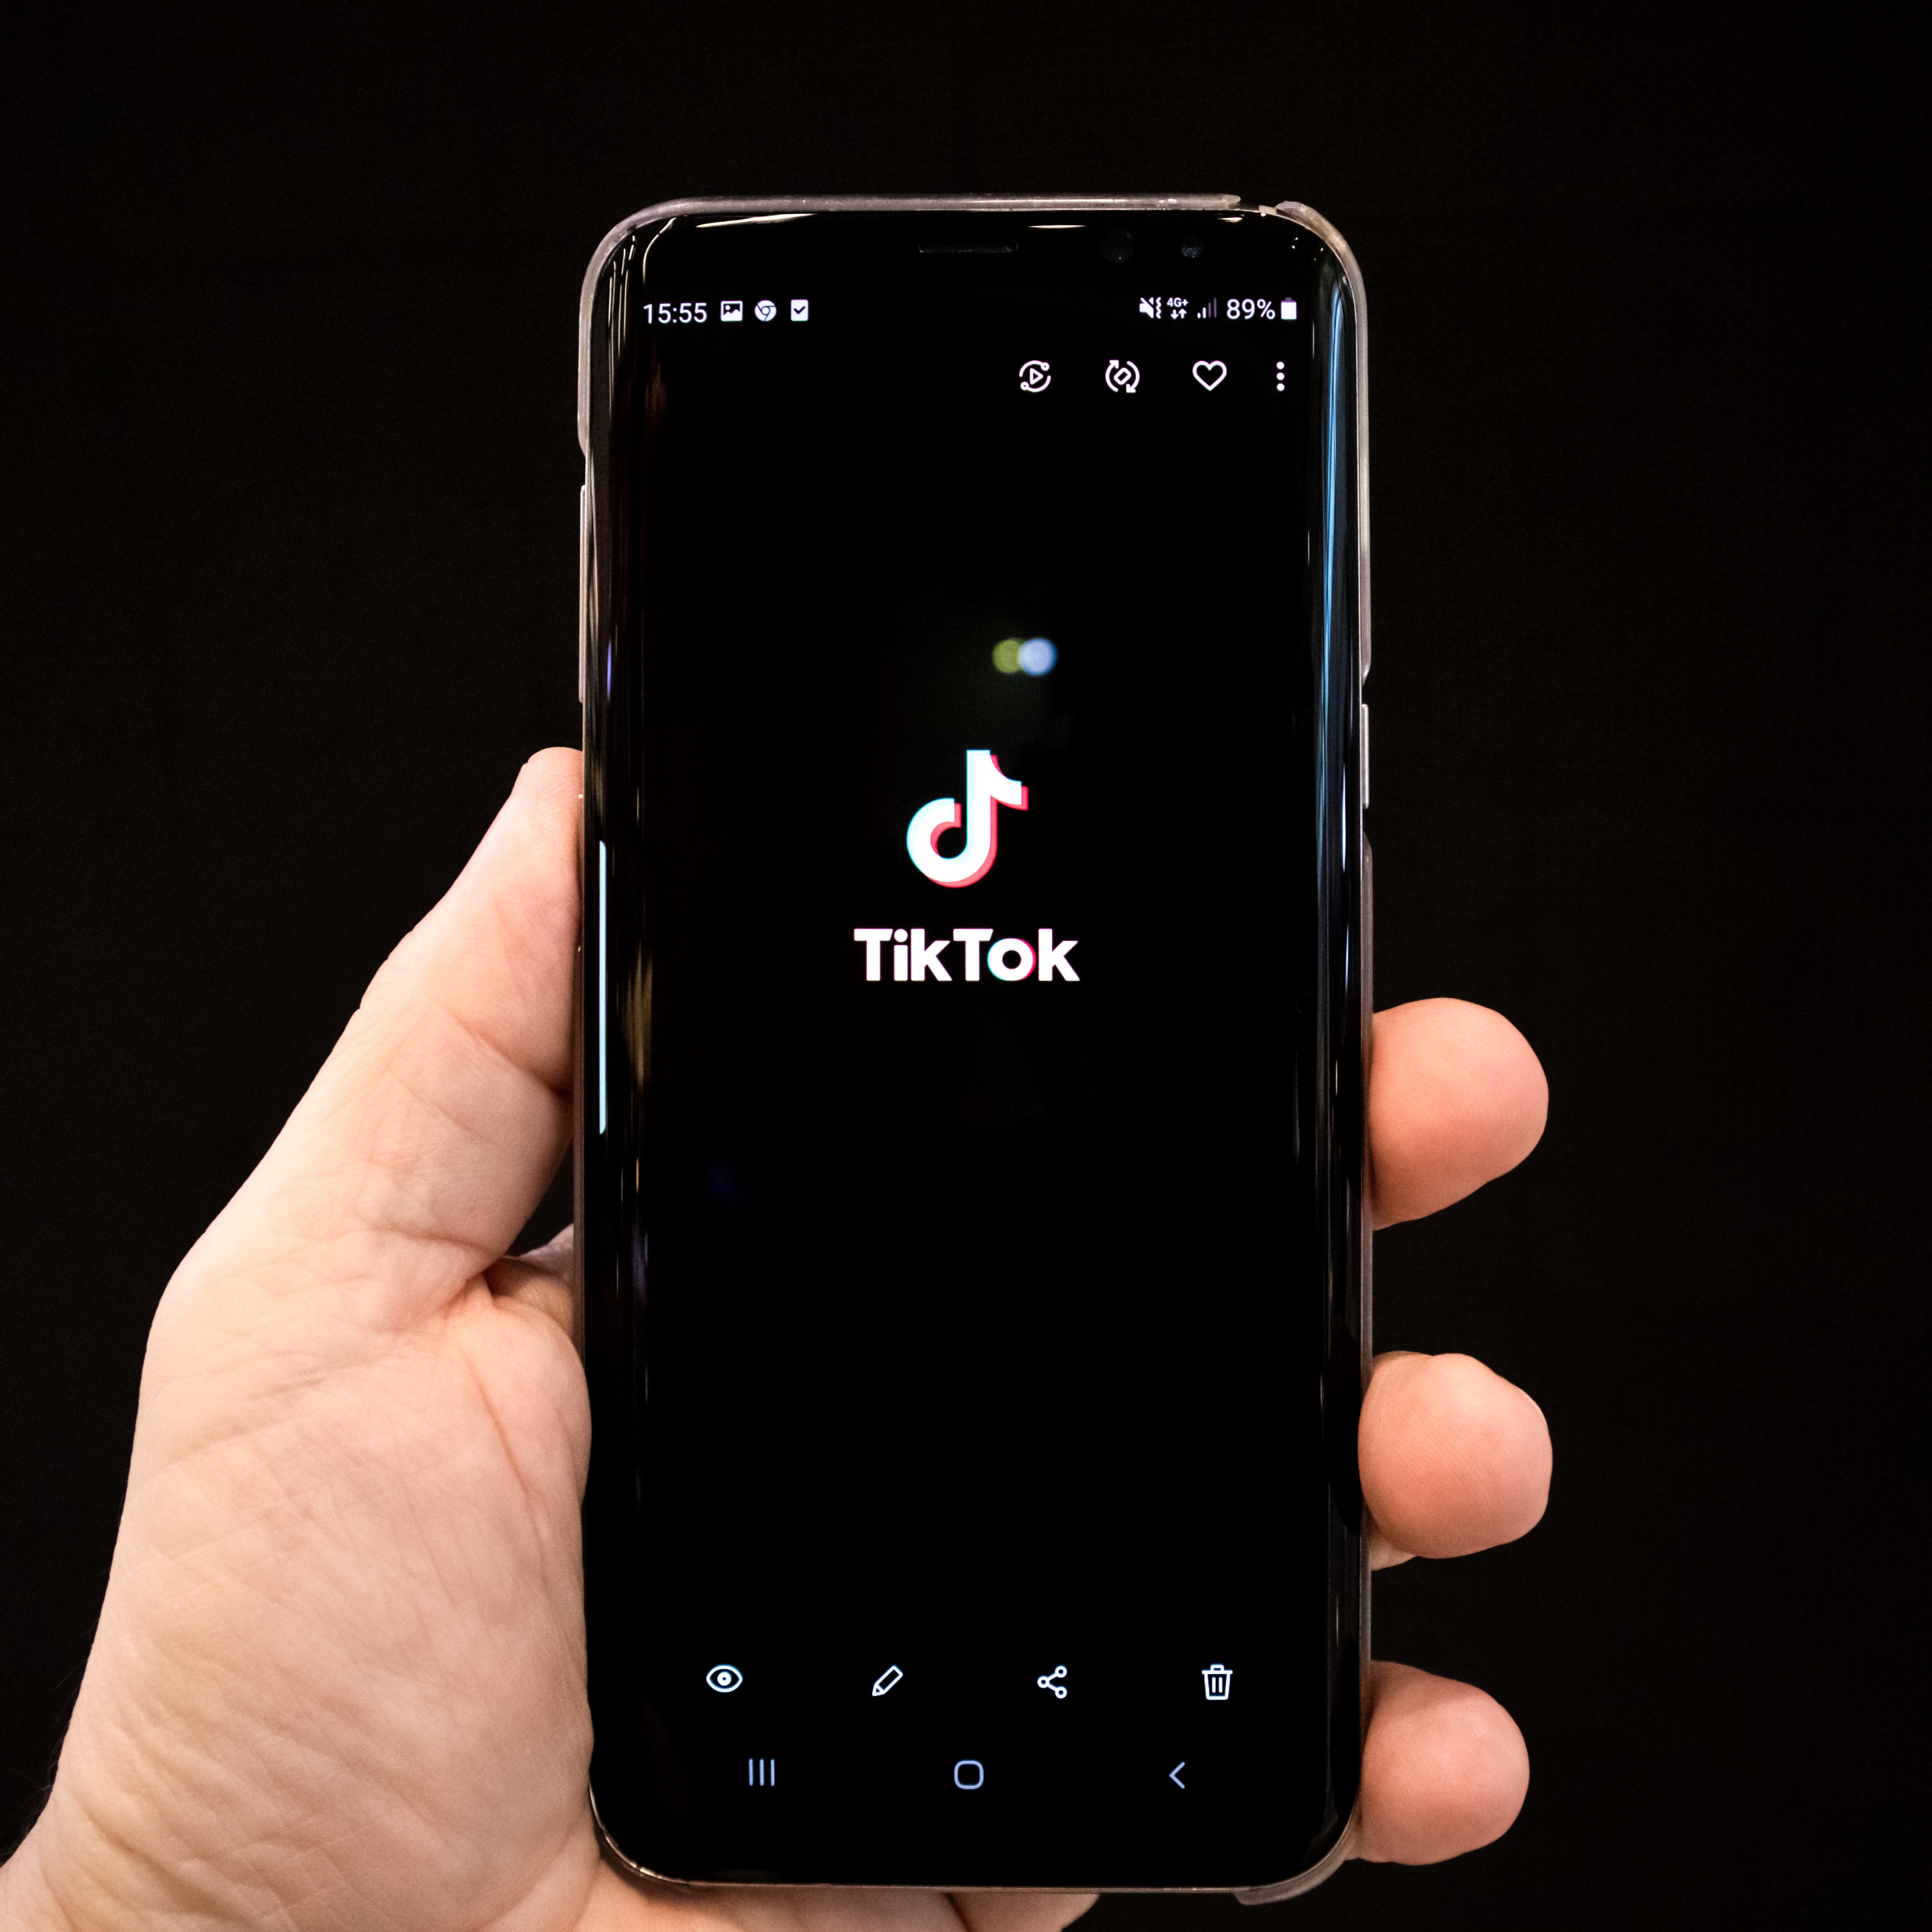 how to download tiktok videos without watermark iphone